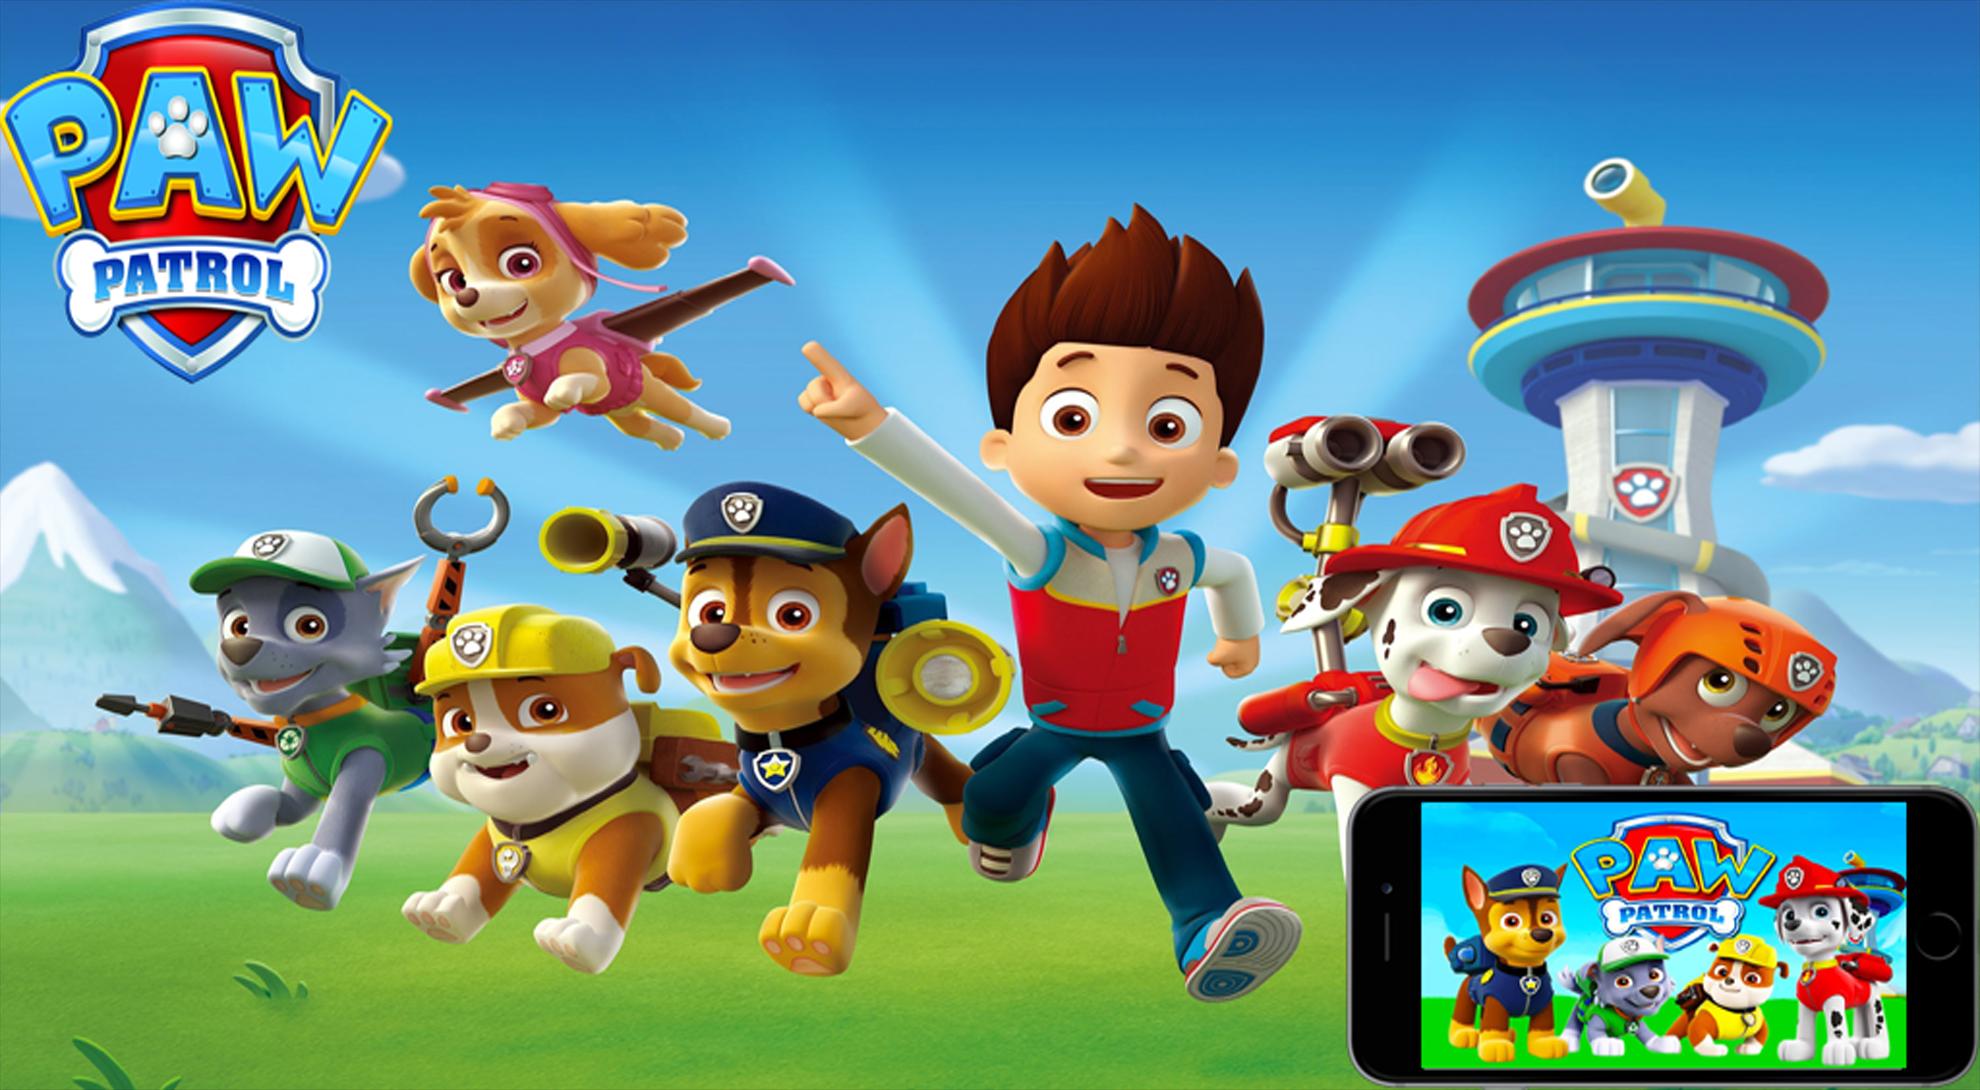 Erhverv frugthave sikring Games paw patrol for Android - APK Download